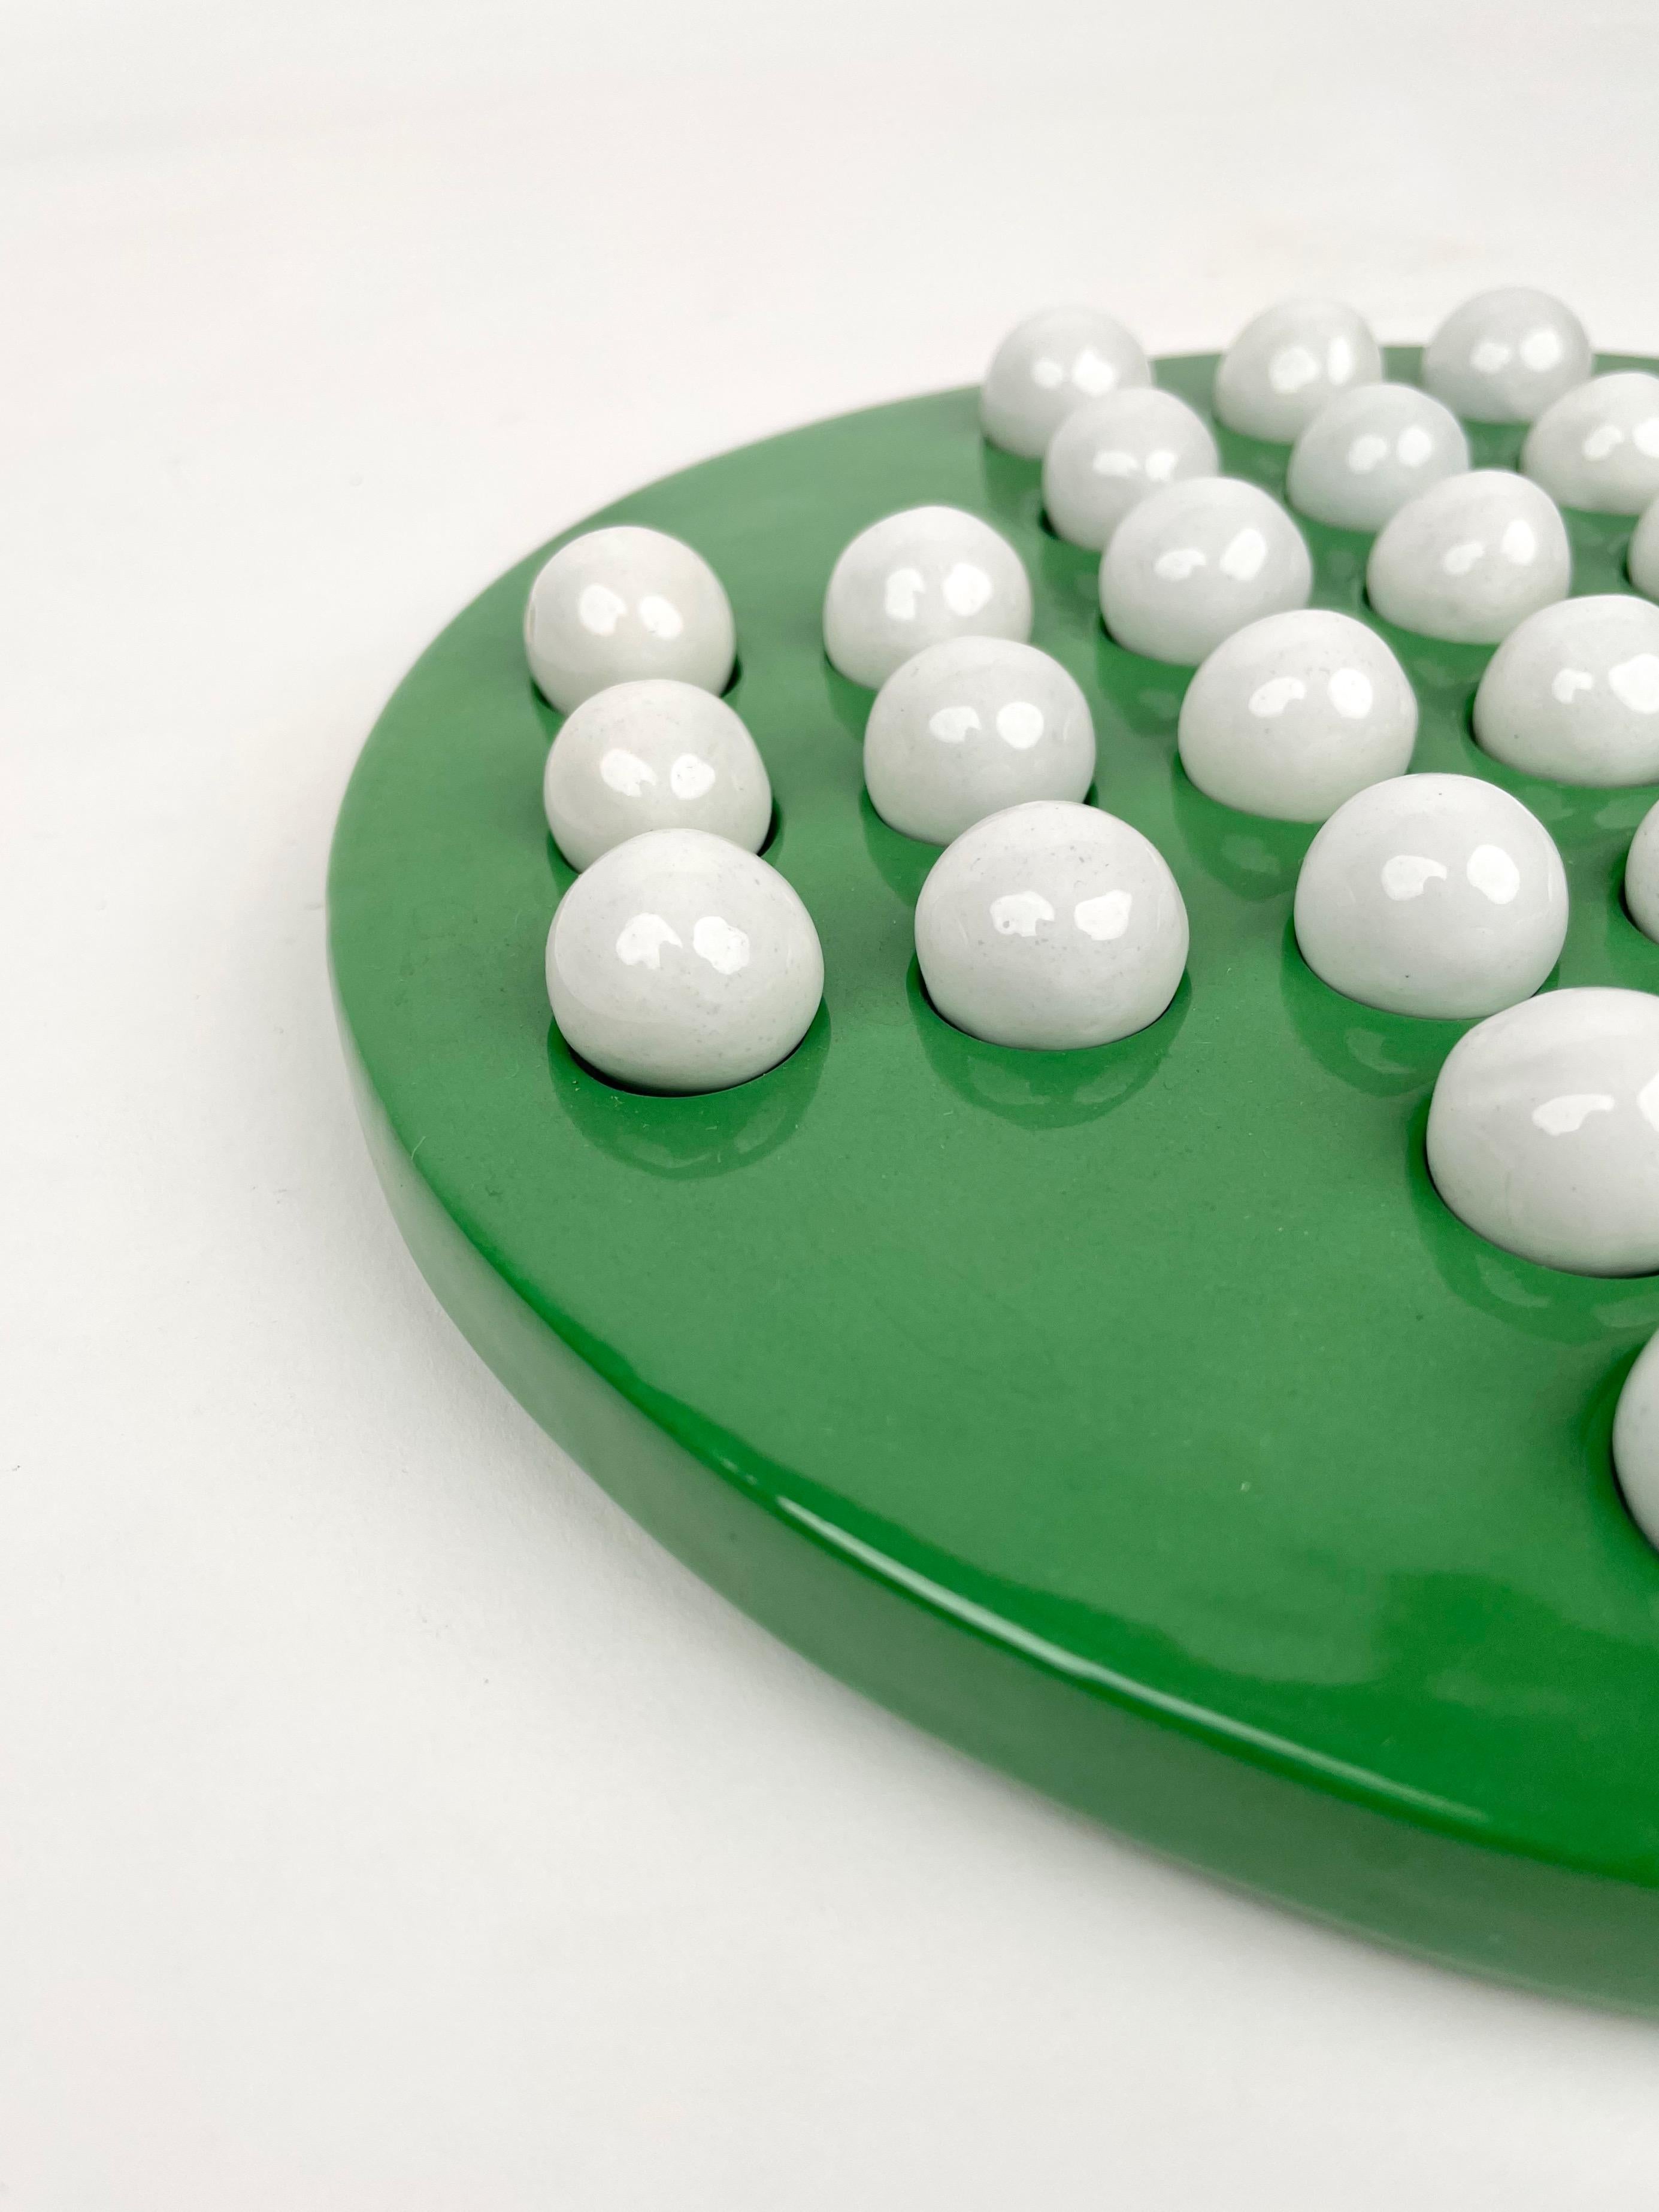 Checkers Game by Ennio Lucini for Gabbianelli Green & White Ceramic, Italy 1970s For Sale 6